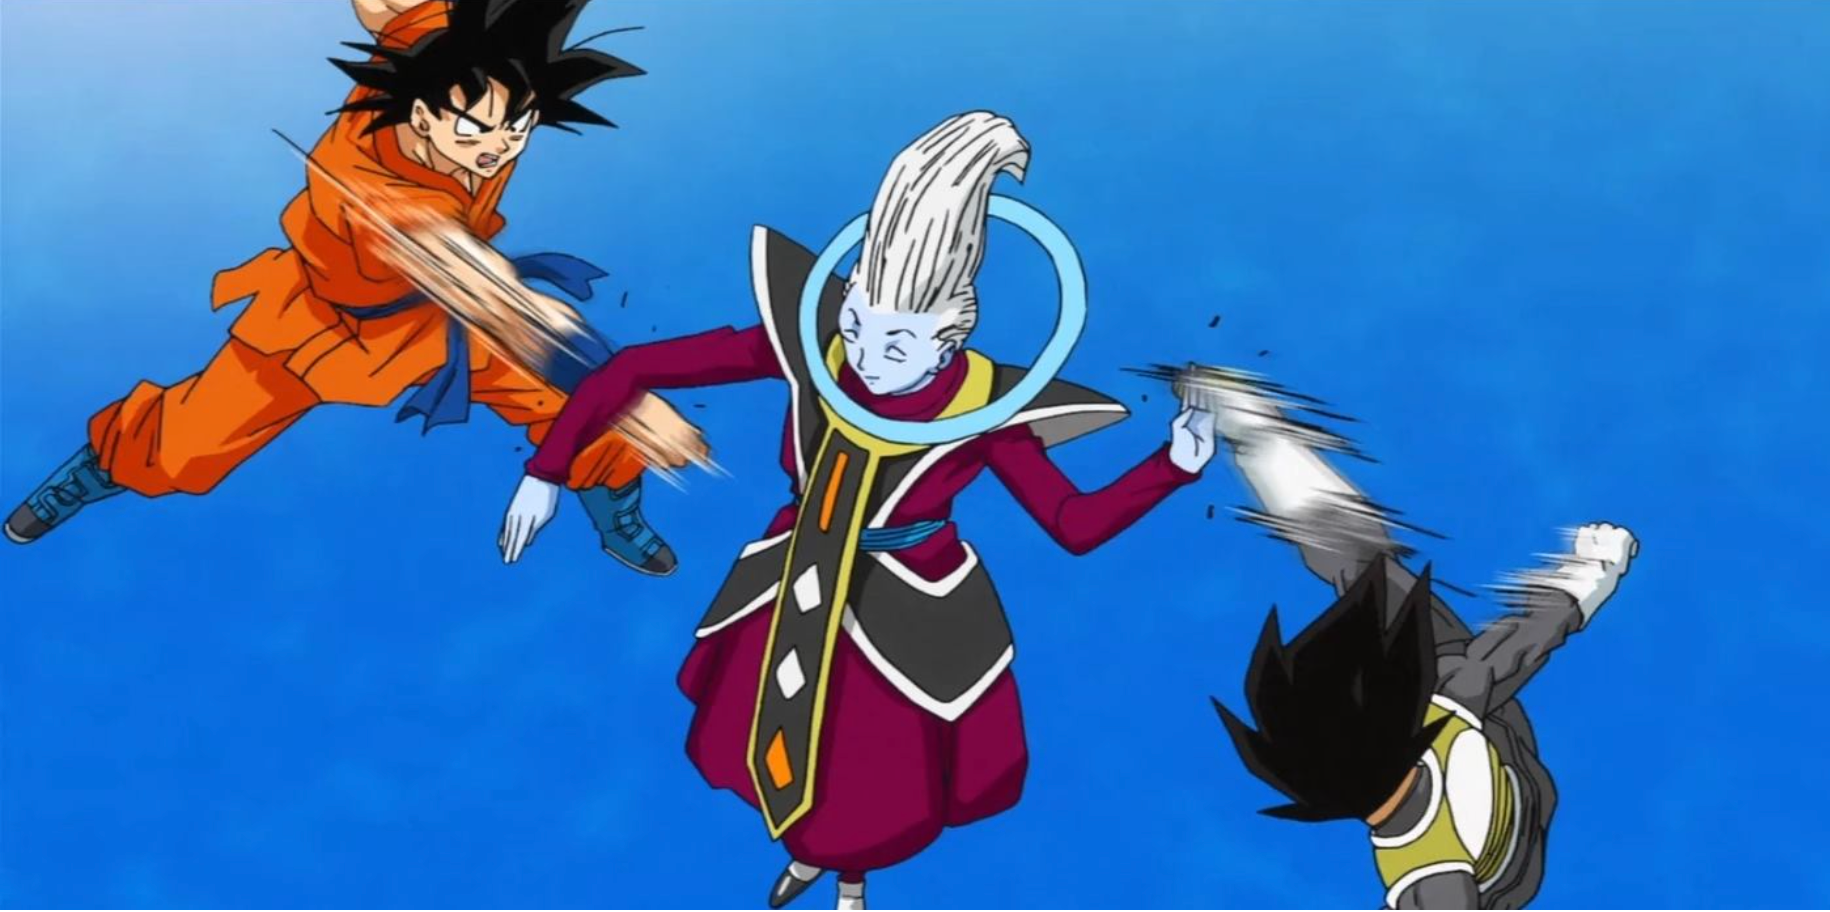 Whis stopping Vegeta and Goku with one hand each